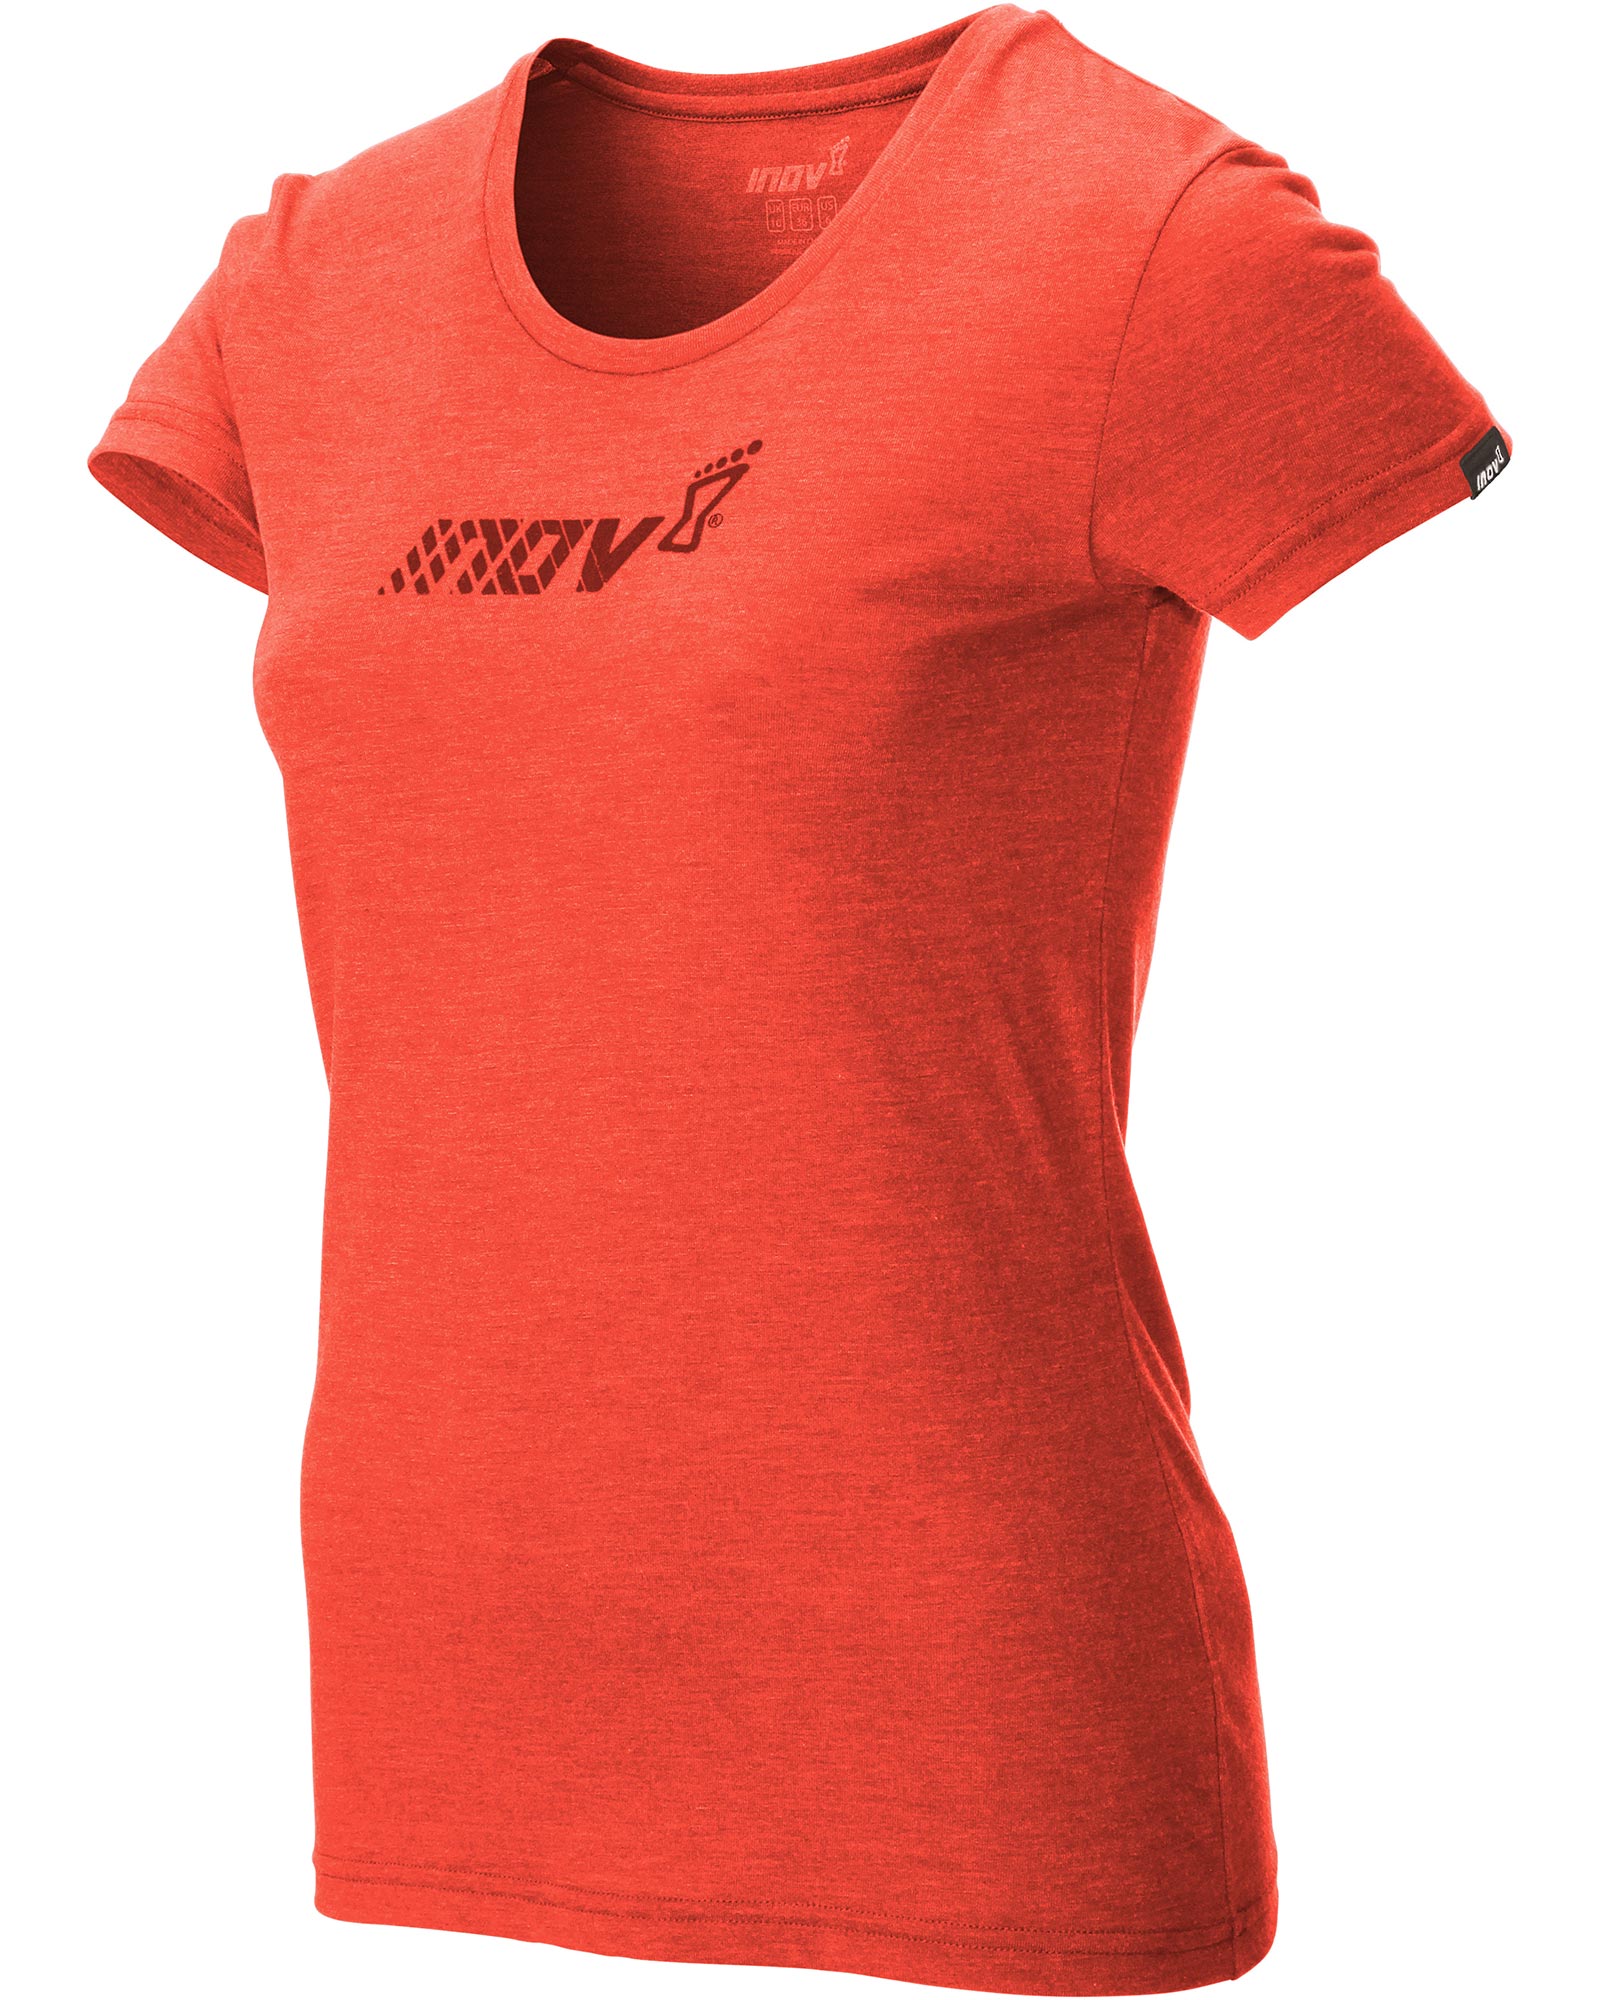 Product image of Inov-8 Triblend Women's T-Shirt